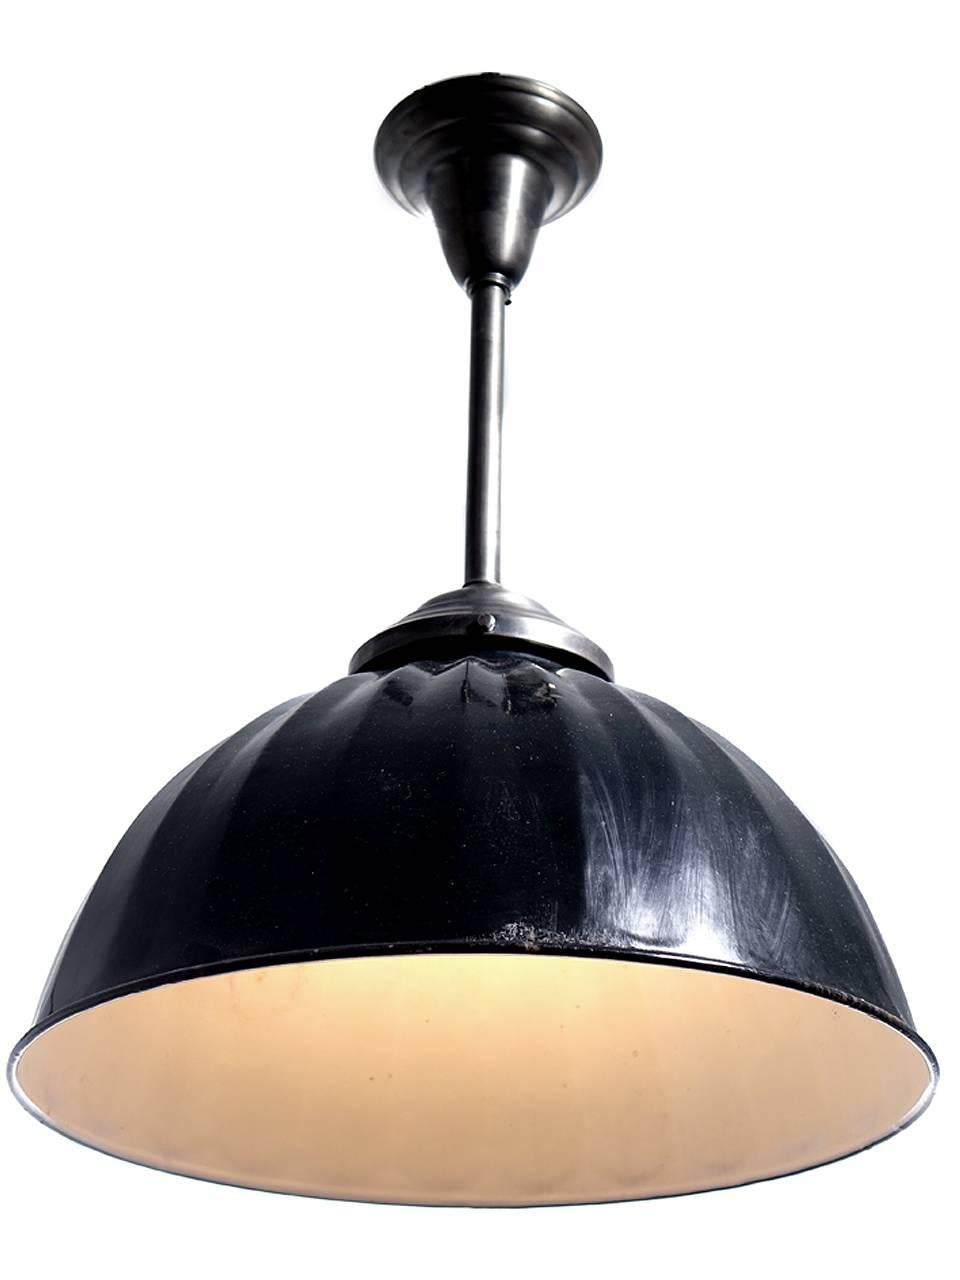 This is a nice large Industrial dome with a black over white finish. The hardware is a brushed silver finish. There is an interesting decorative pleated stamping all around the surface. The finish has a light rustic patina showing a few marks here